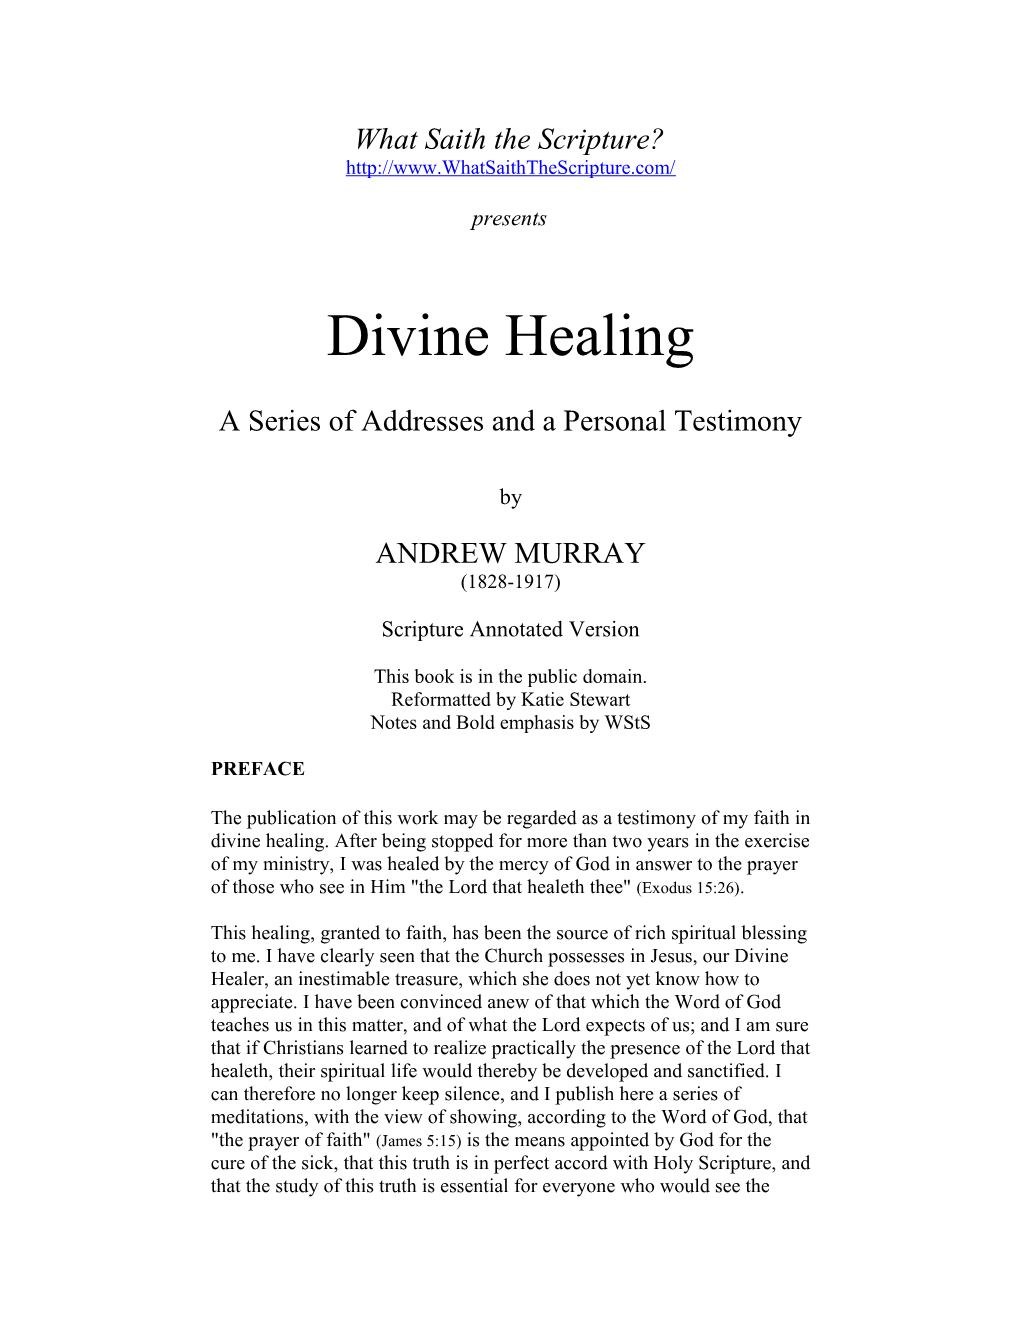 Divine Healing Text by Andrew Murray